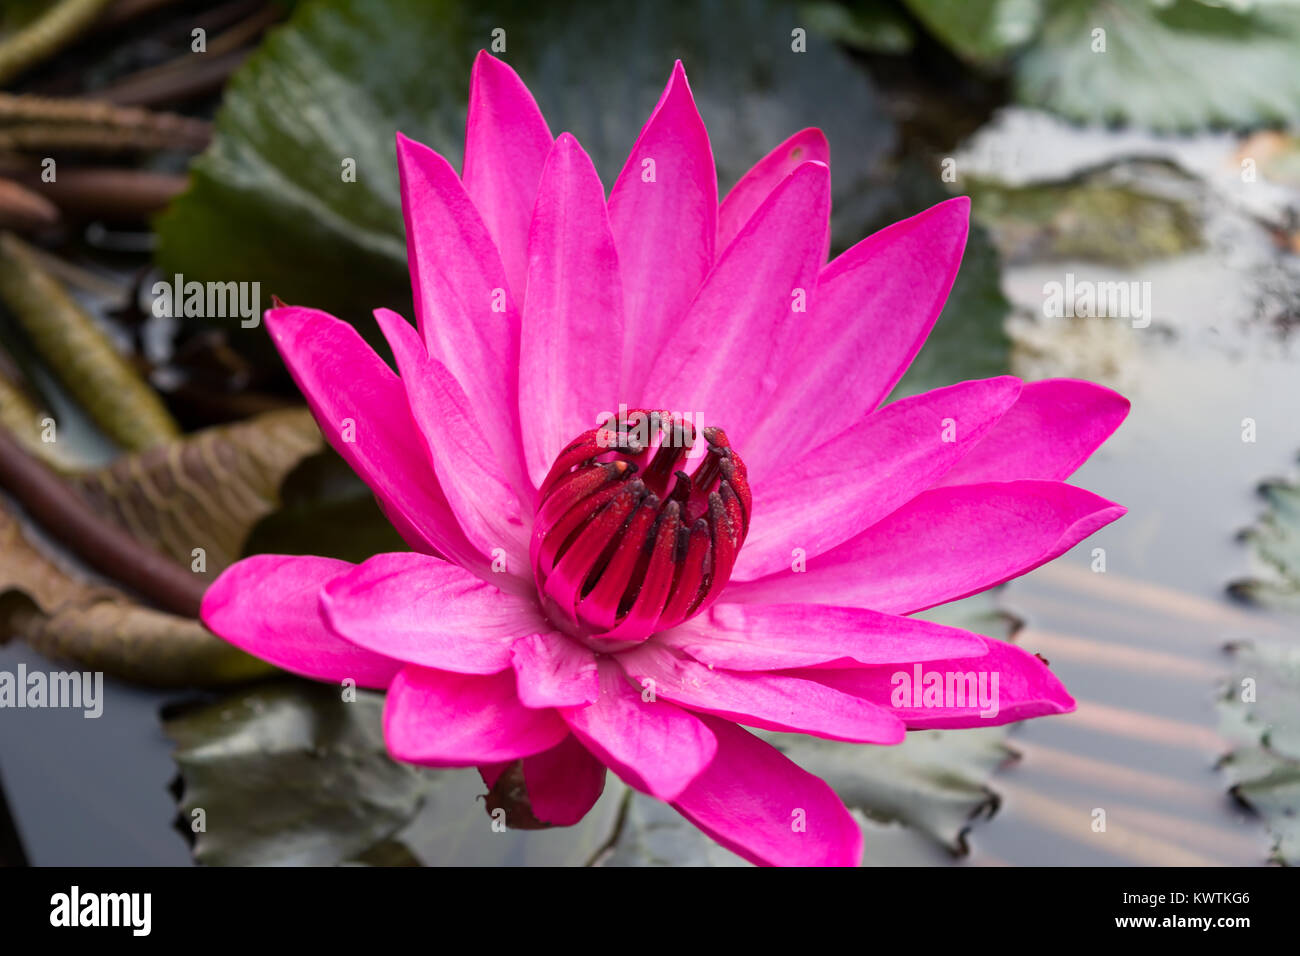 Closeup Lotus Flower on water with leaves in garden Park pond Stock Photo